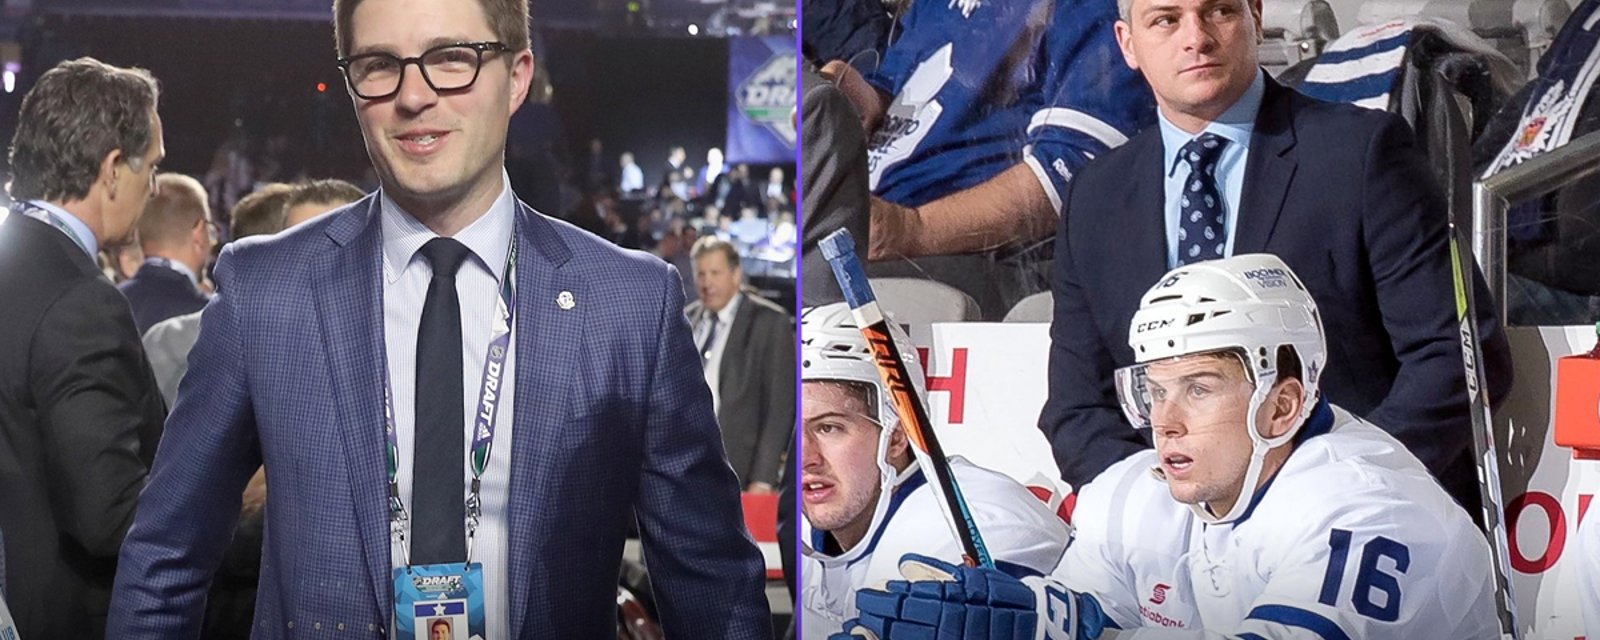 Dubas doubles down on analytics, creates new position that appears to be in conflict with coach Keefe